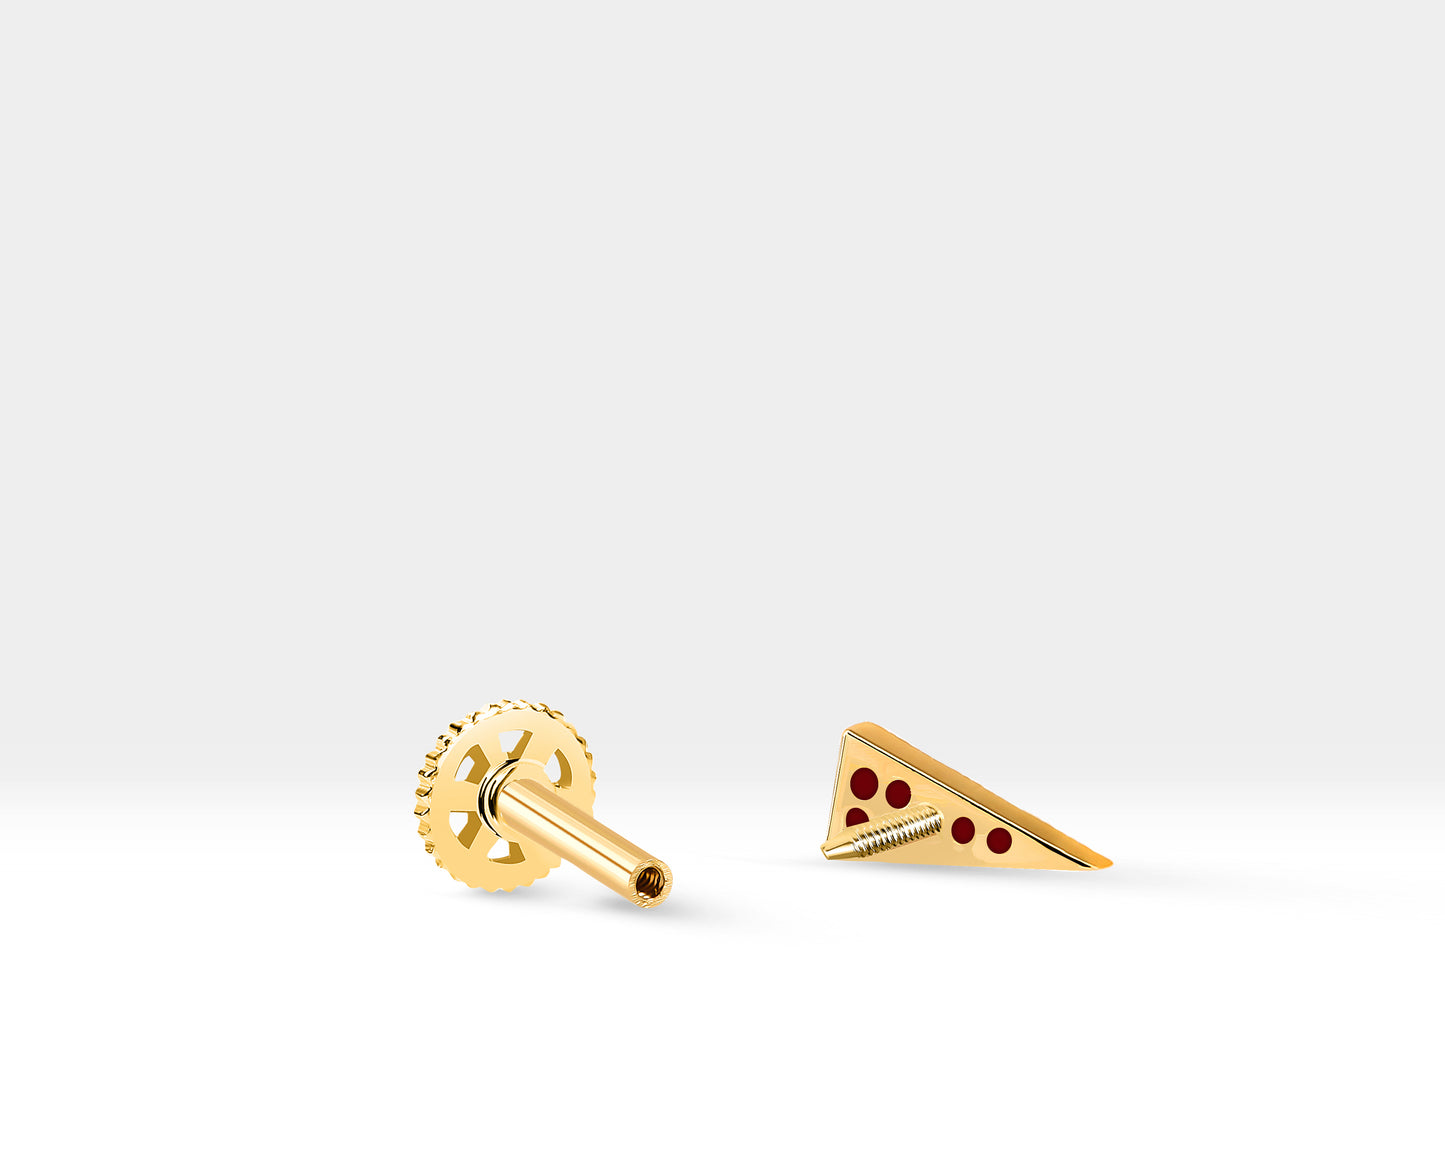 Tragus Piercing,Pave Setting Ruby Piercing,Triangle Design Piercing,14K Yellow Solid Gold